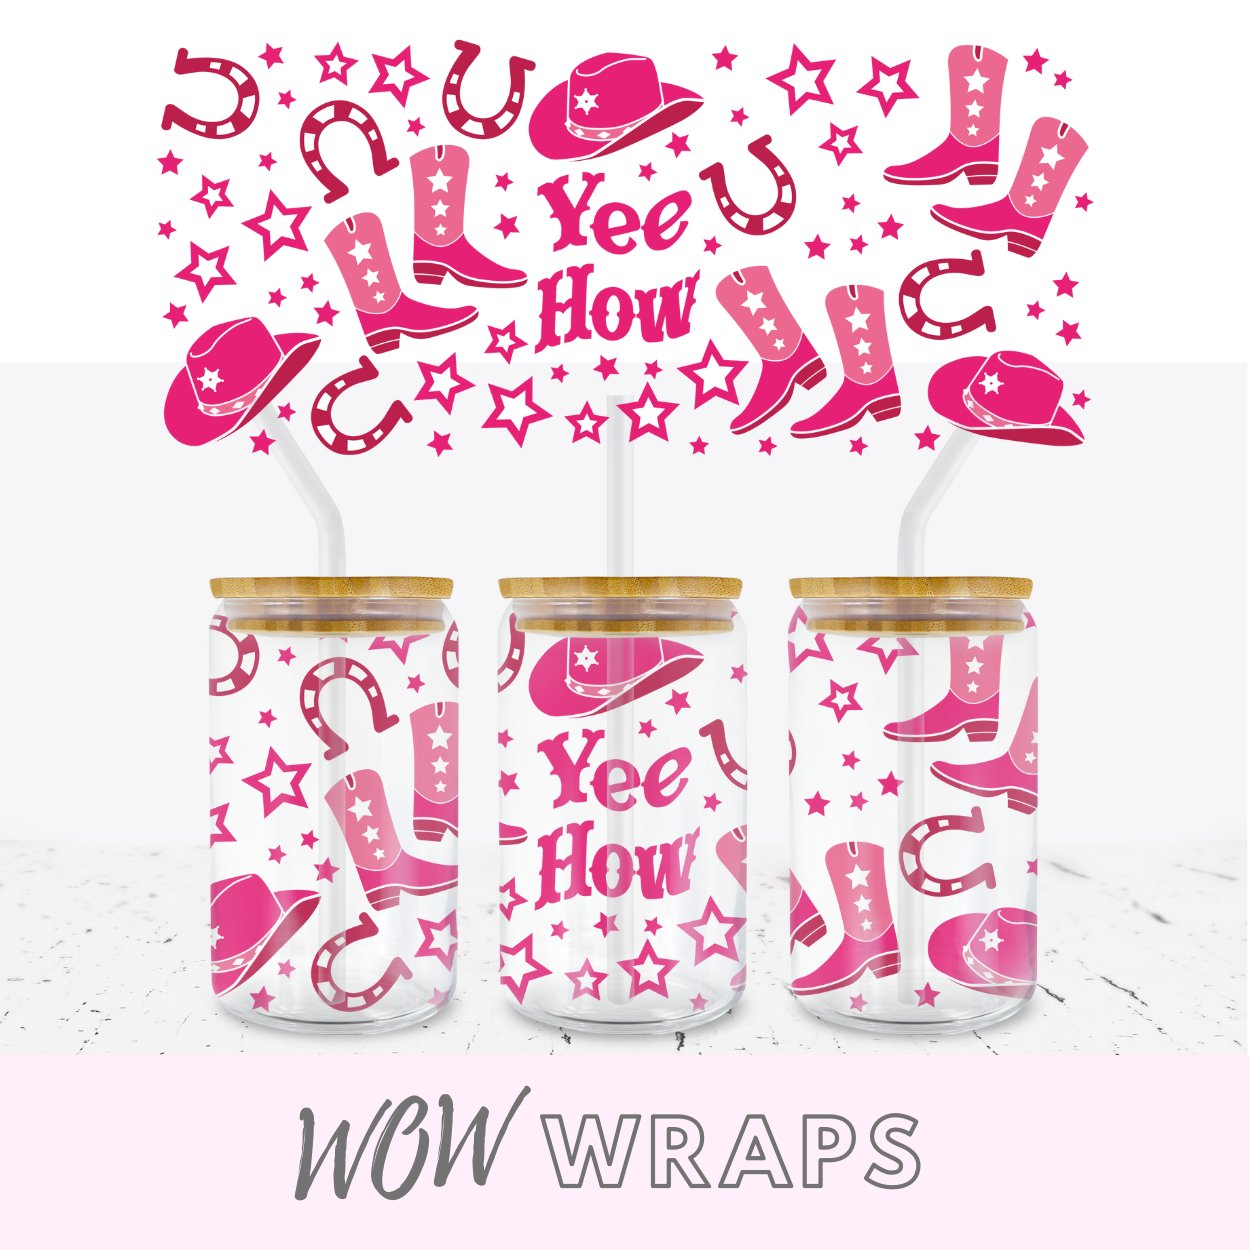 COW GIRL LIBBEY GLASS CAN WRAP - Wow Wraps